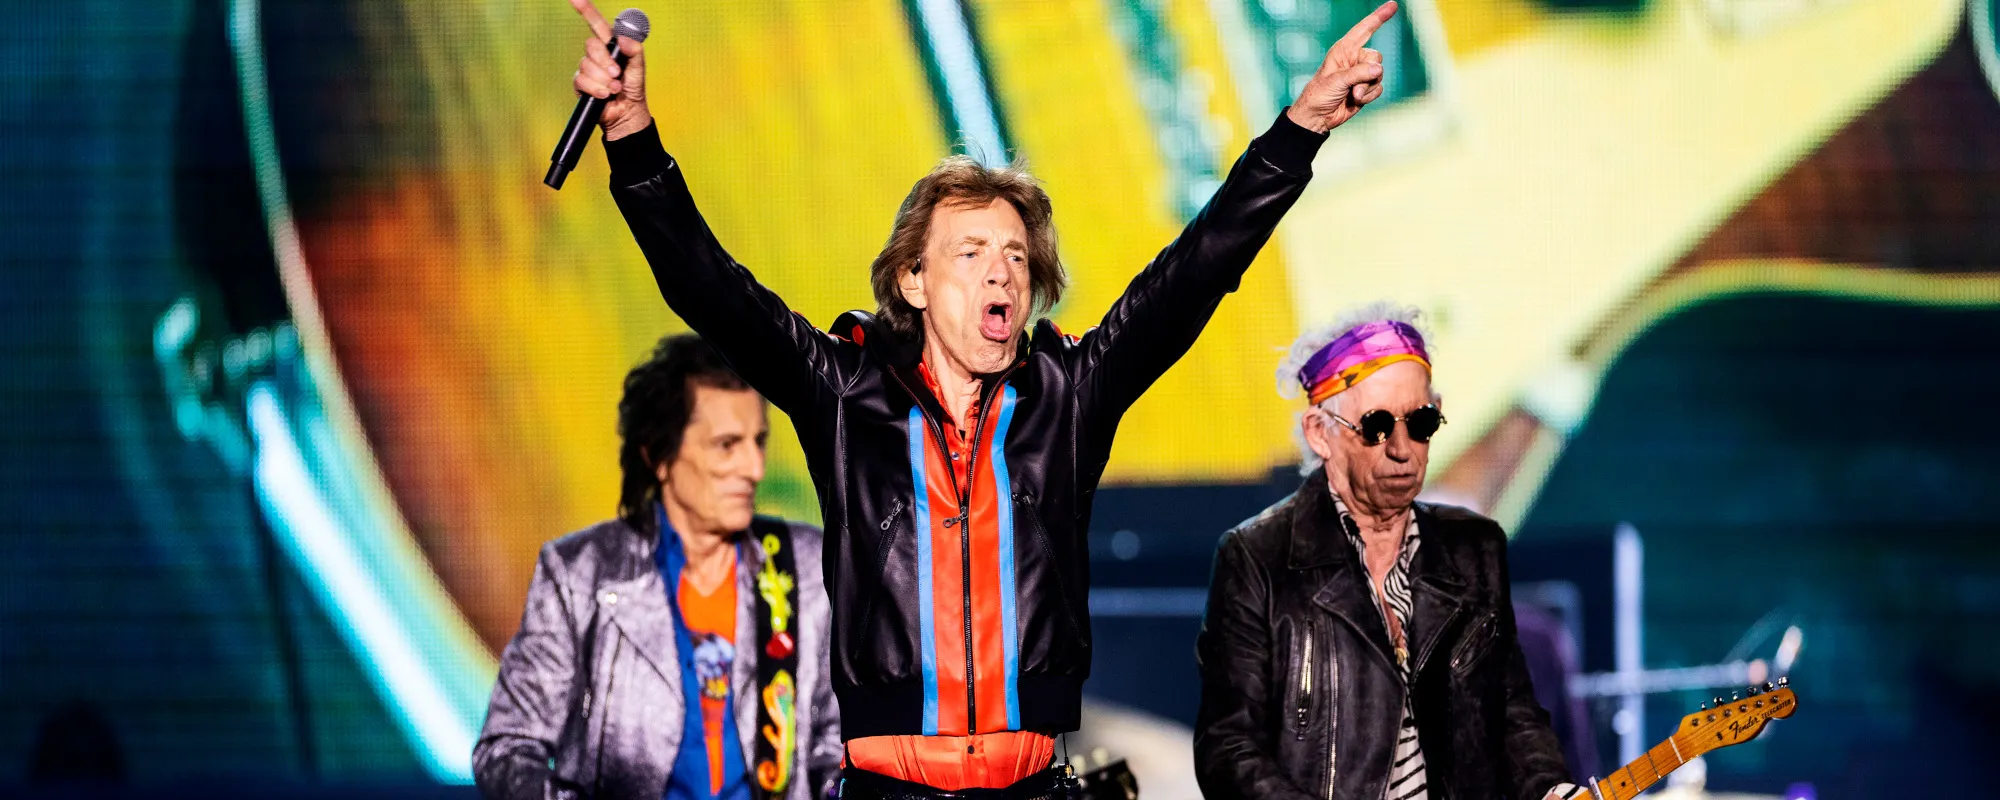 Review: The Stones at 50 – GRRR Offers a Reliable Growl